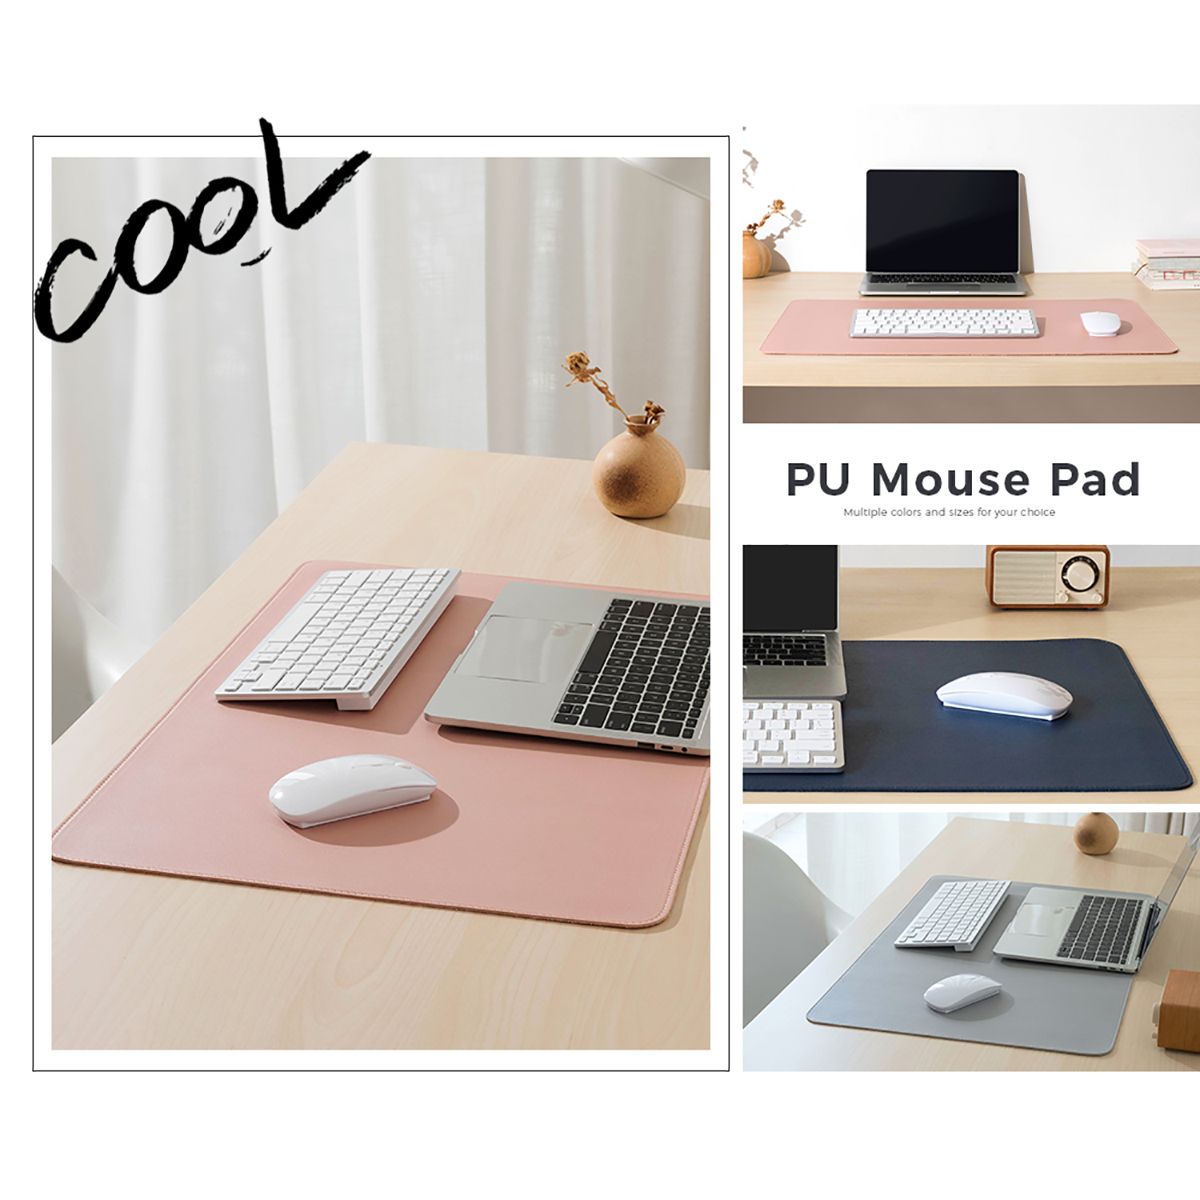 Double-side-Large-Mouse-Pad-PU-Leather-Non-slip-Gaming-Keyboard-Pad-Table-Desktop-Protective-Mat-for-1740580